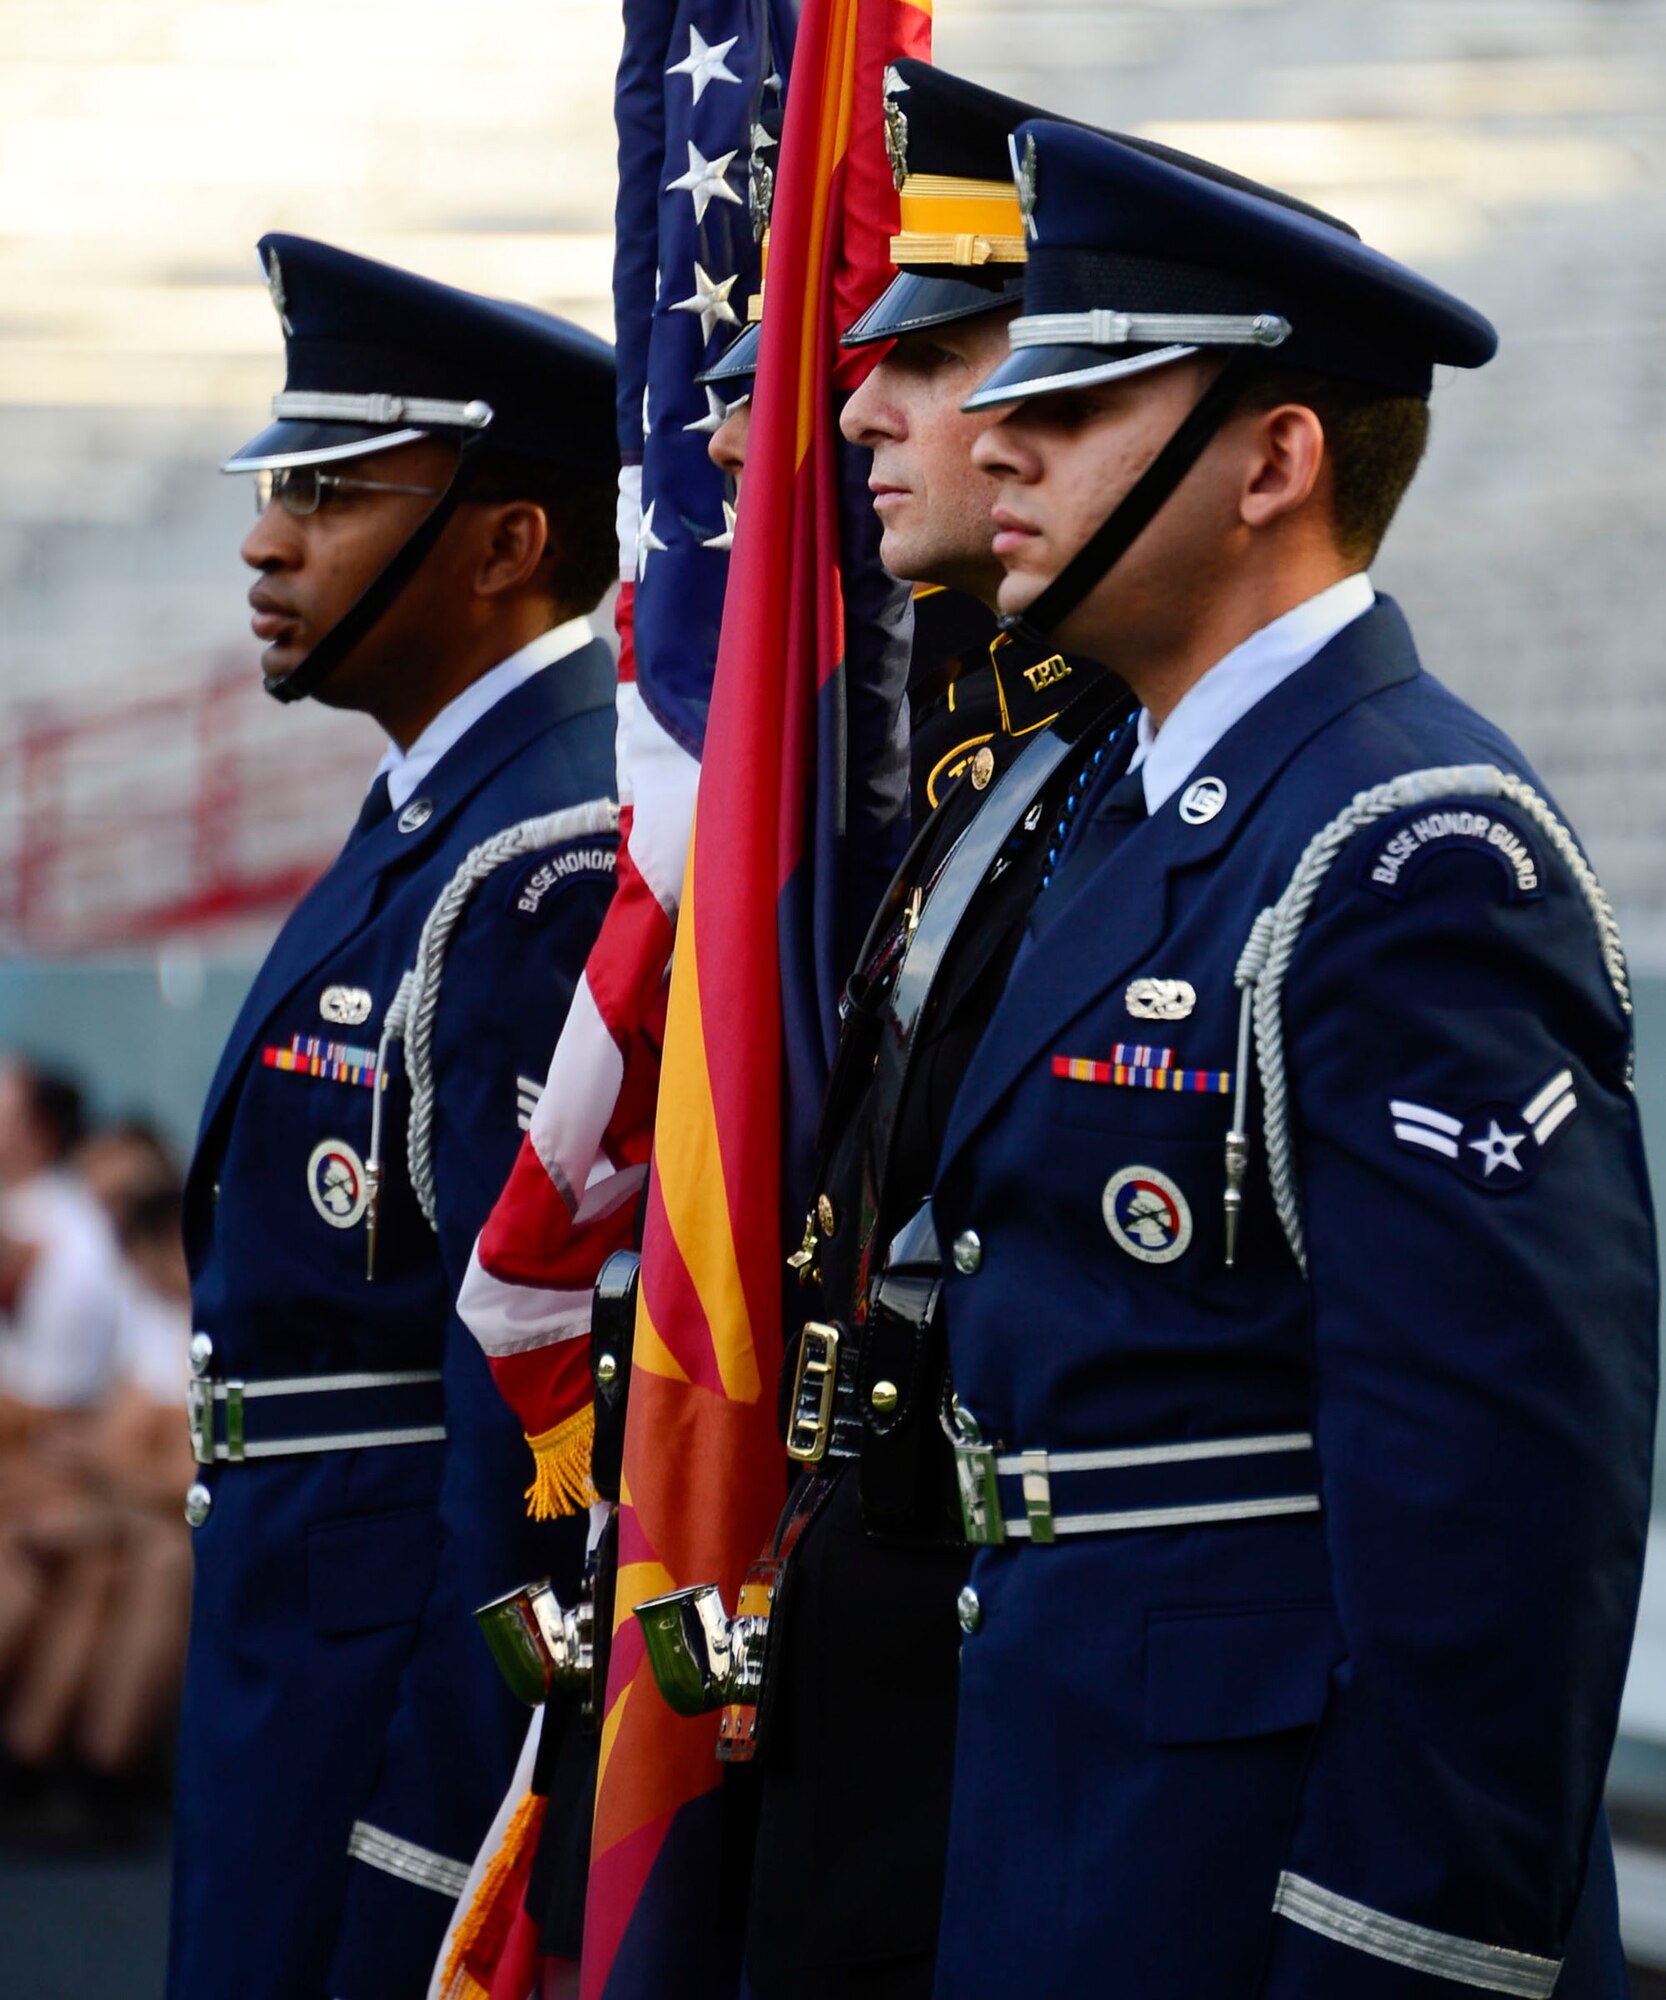 Members of the Davis-Monthan and Tucson Police Department Honor Guard post the colors during the 9/11 Tower Challenge at the University of Arizona football stadium in Tucson, Ariz., Sept. 11, 2015. Members of 12th Air Force (Air Forces Southern) joined the Tucson community to honor those who lost their lives during the Sept. 11, 2001 attacks and to show their support for first responders and military members who continue to protect the U.S. from foreign and domestic threats. During the 9/11 Tower Challenge, participants climbed 2,071 steps representing the number of steps that were in the Twin Towers. (U.S. Air Force Photo by Tech. Sgt. Heather R. Redman/Released)